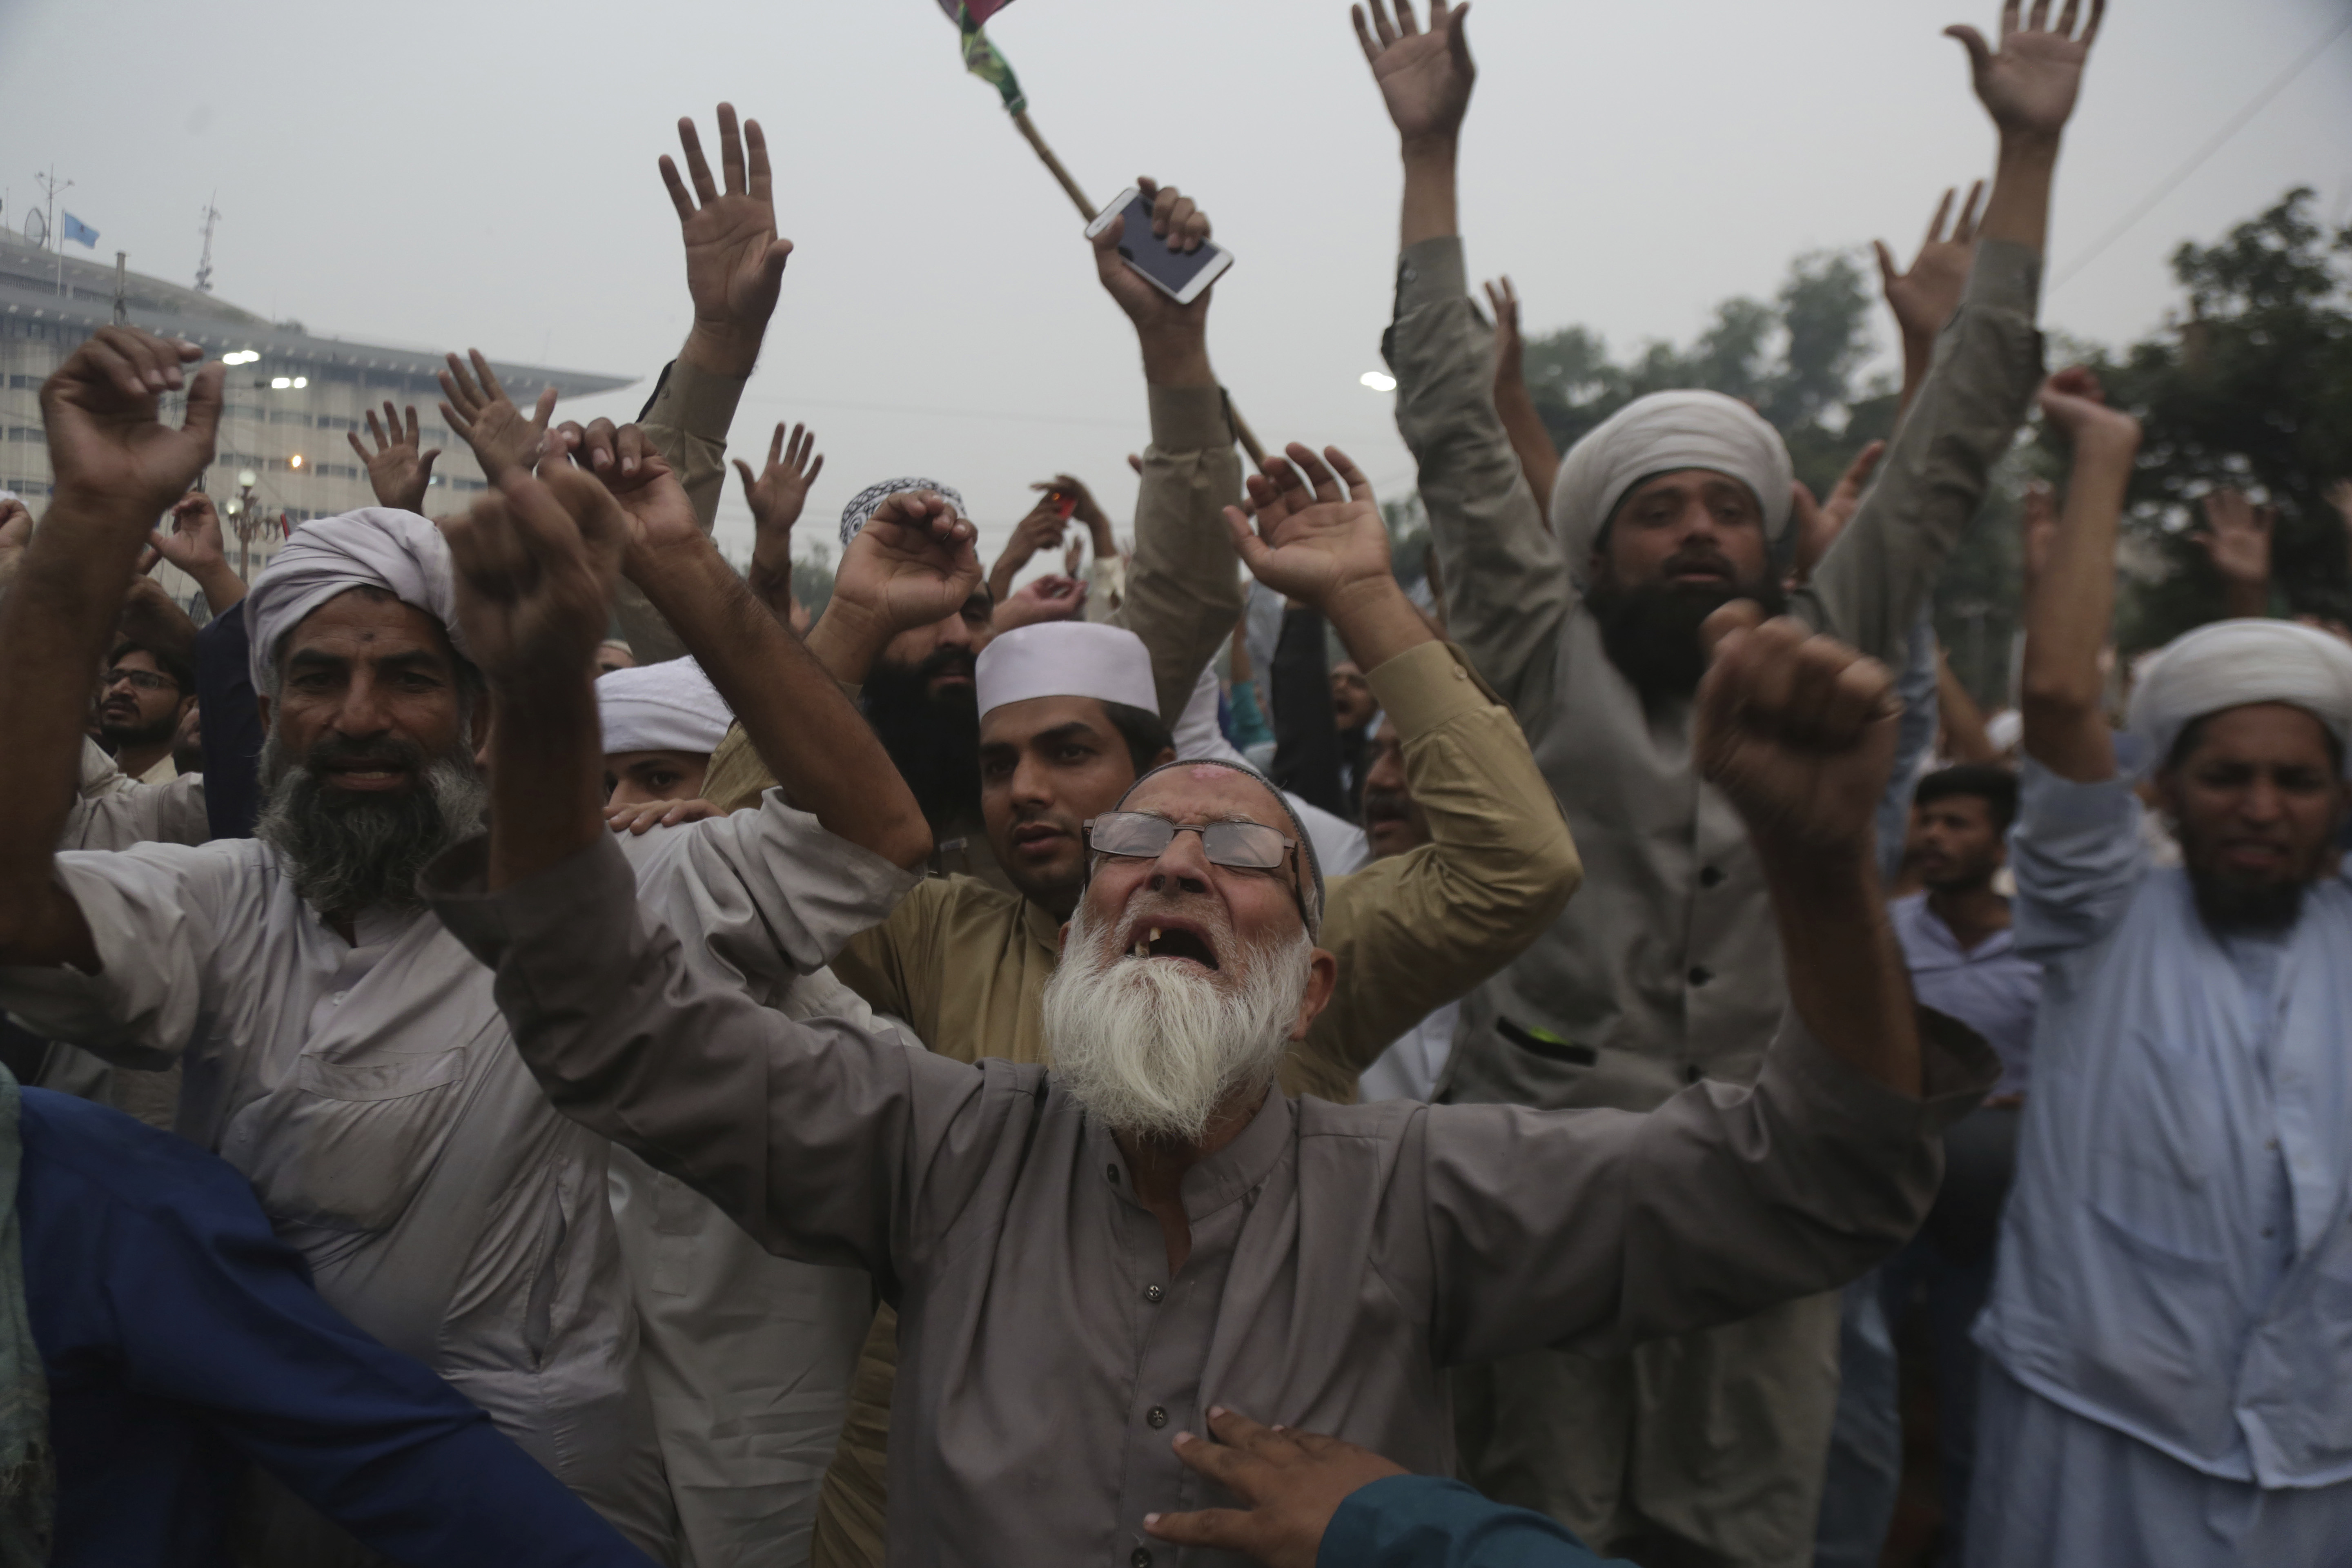 Protesters in Lahore, Pakistan, shout slogans Friday during a rally to condemn a court decision that acquitted Asia Bibi, a Christian woman who spent eight years on death row accused of blasphemy.